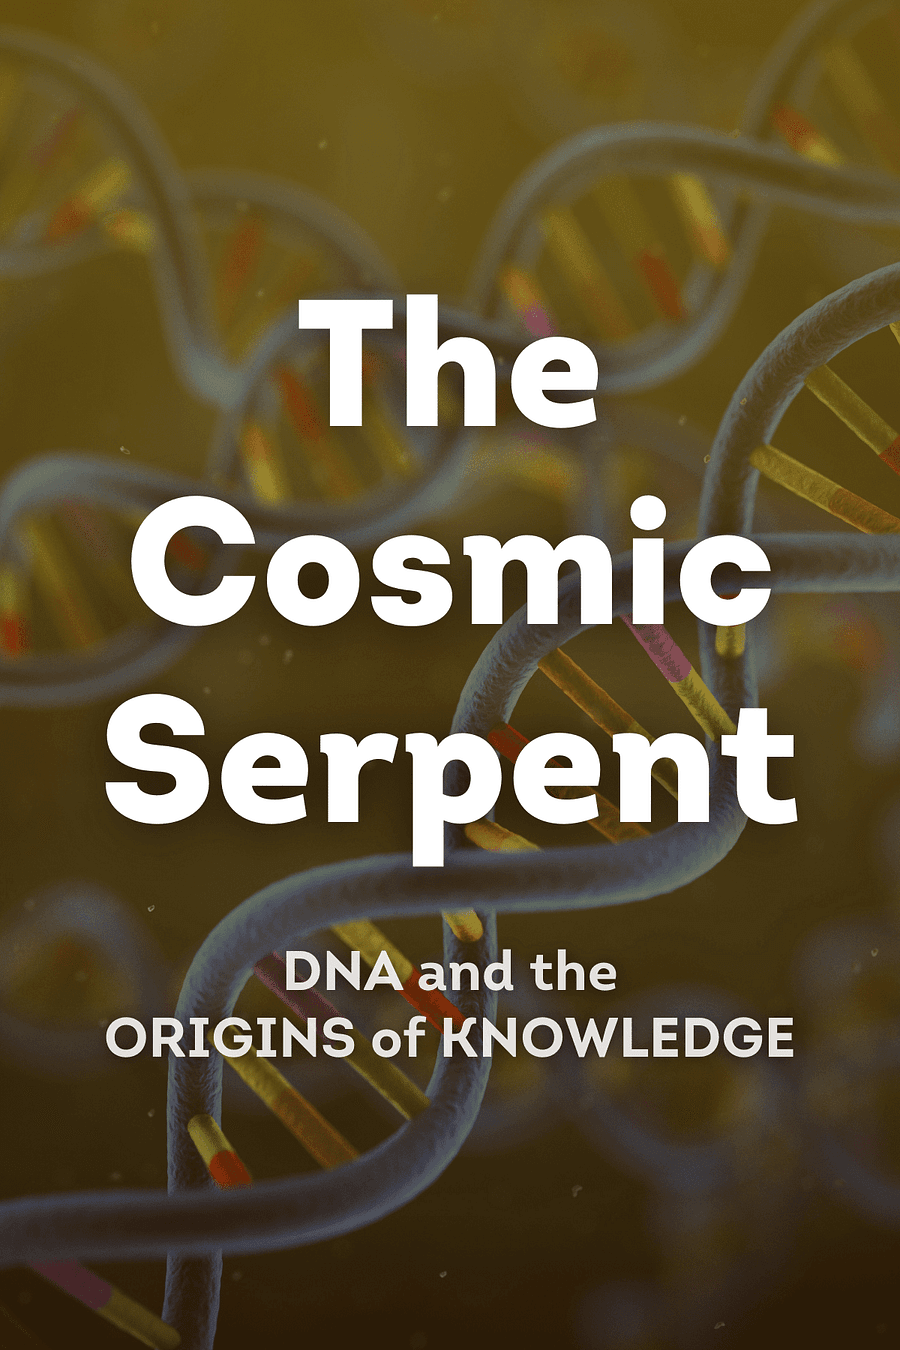 The Cosmic Serpent by Jeremy Narby - Book Summary